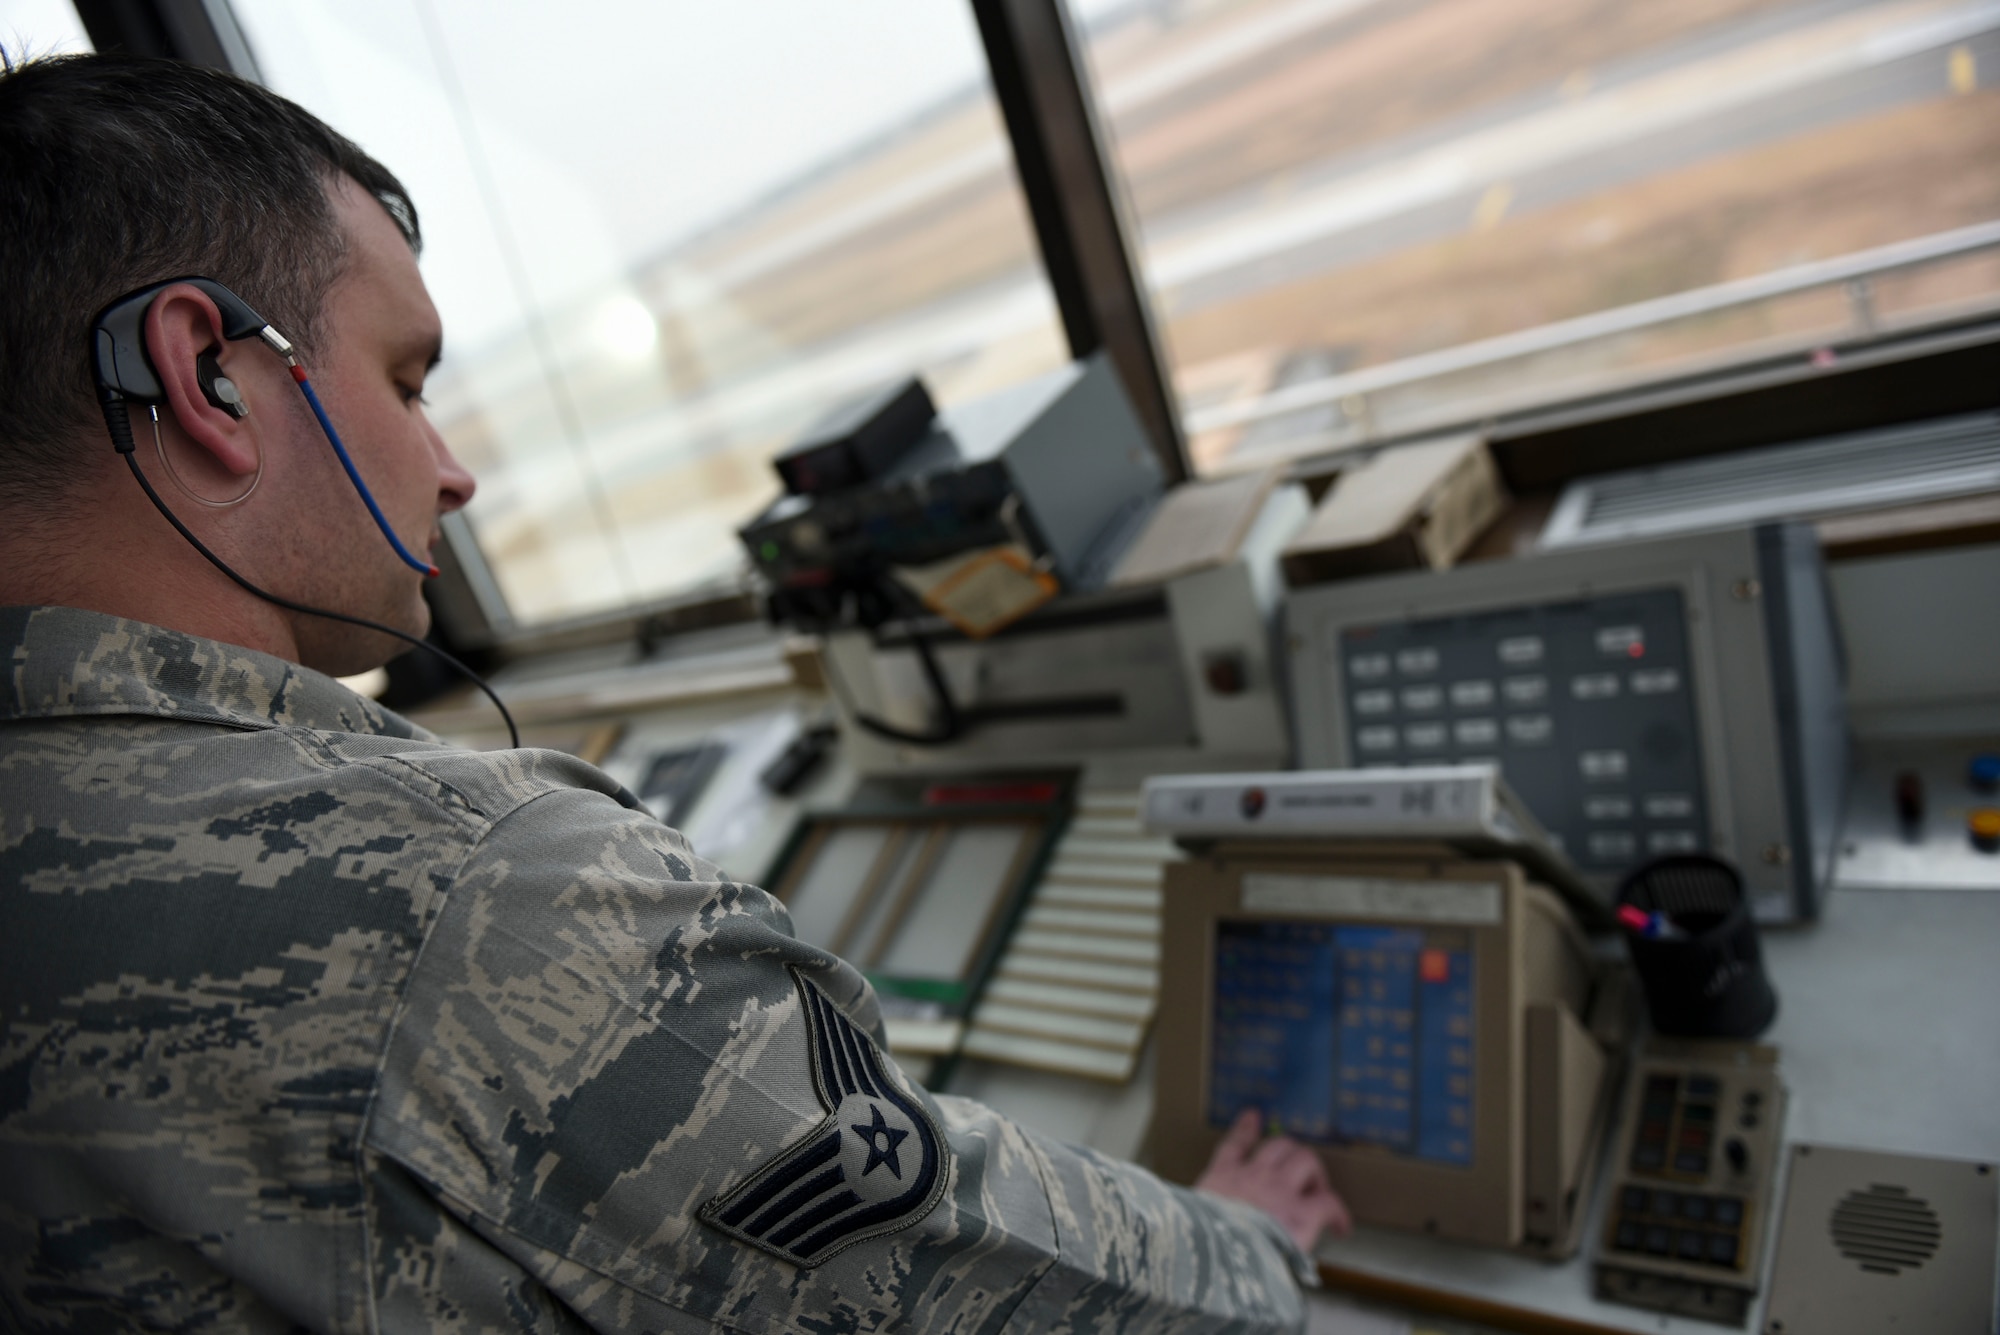 Staff Sgt. Jeffery Howard, 8th Operations Support Squadron air traffic controller, adjusts his radio frequency at Kunsan Air Base, Republic of Korea, Jan. 5, 2017. Howard’s primary responsibilities include communicating with aircraft entering and leaving Kunsan airspace. (U.S. Air Force photo by Senior Airman Michael Hunsaker/Released)